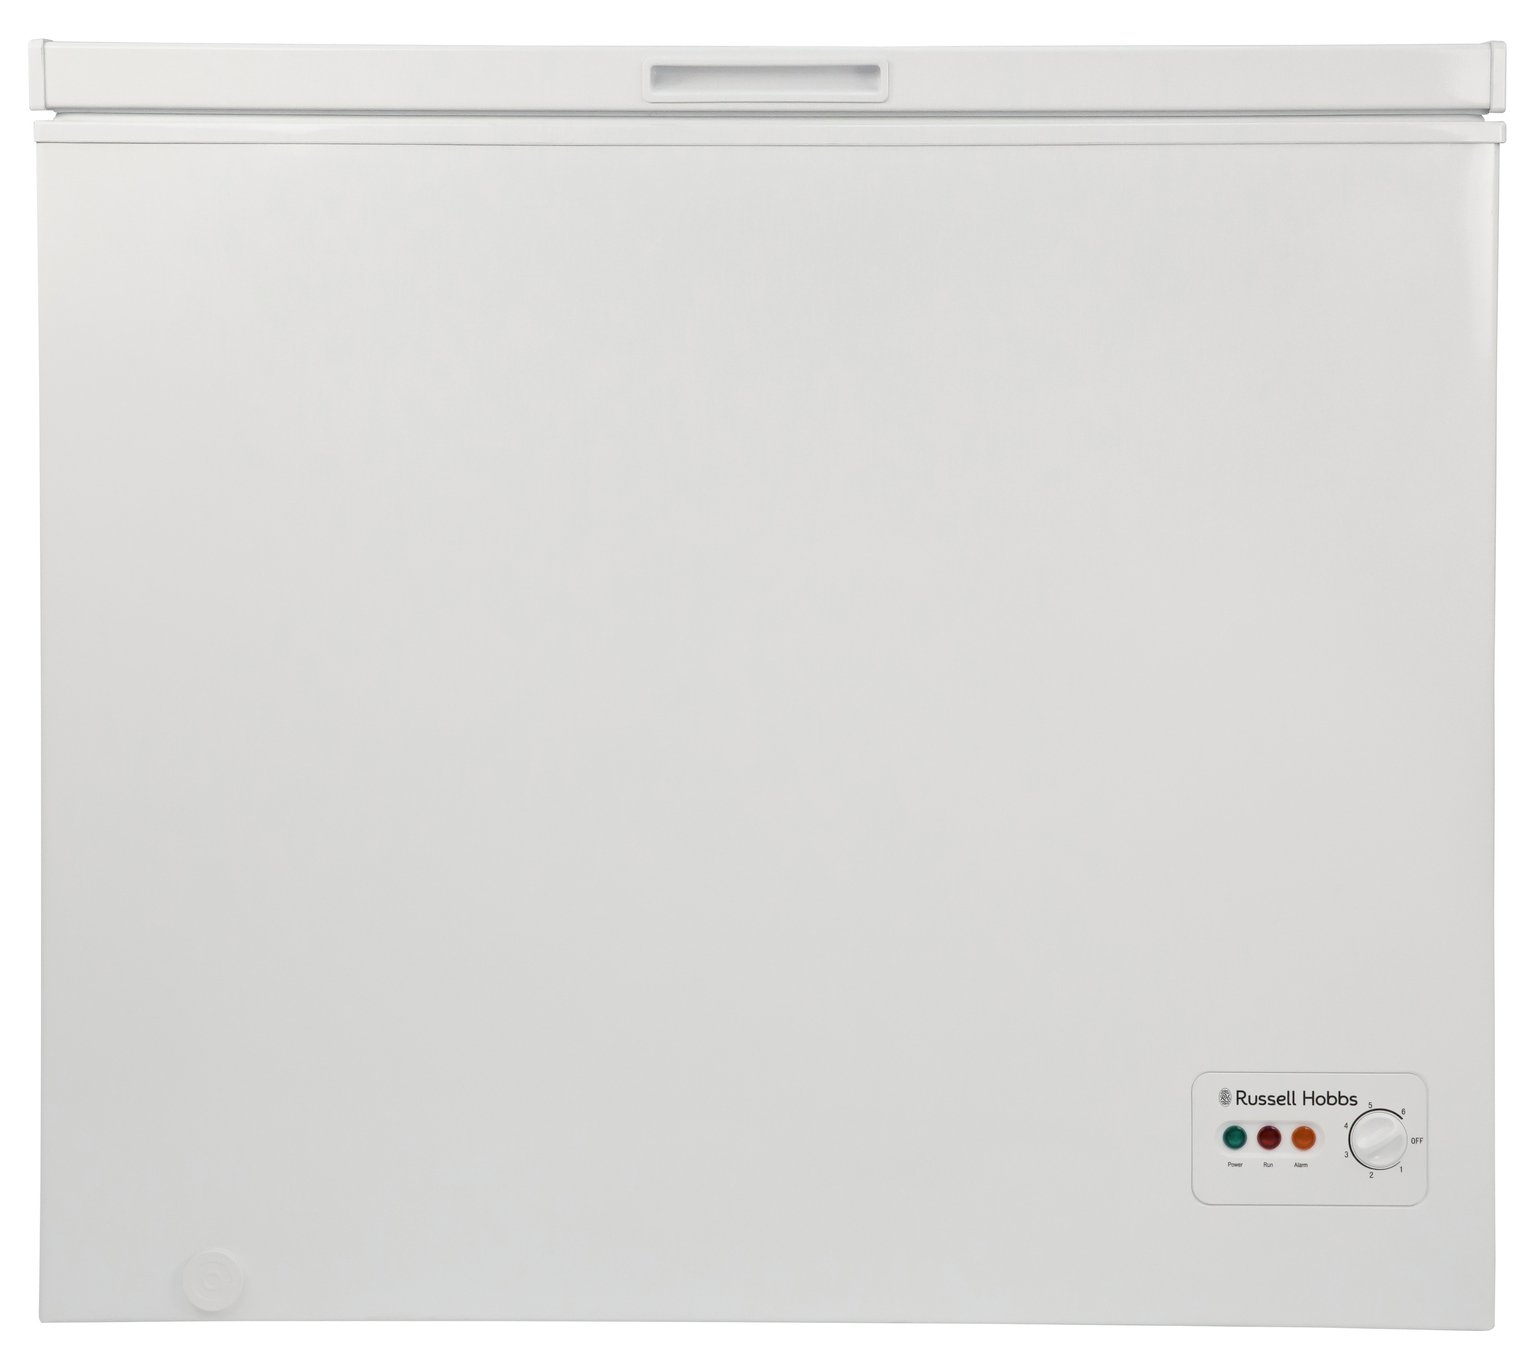 Russell Hobbs RHCF200 Chest Freezer Review